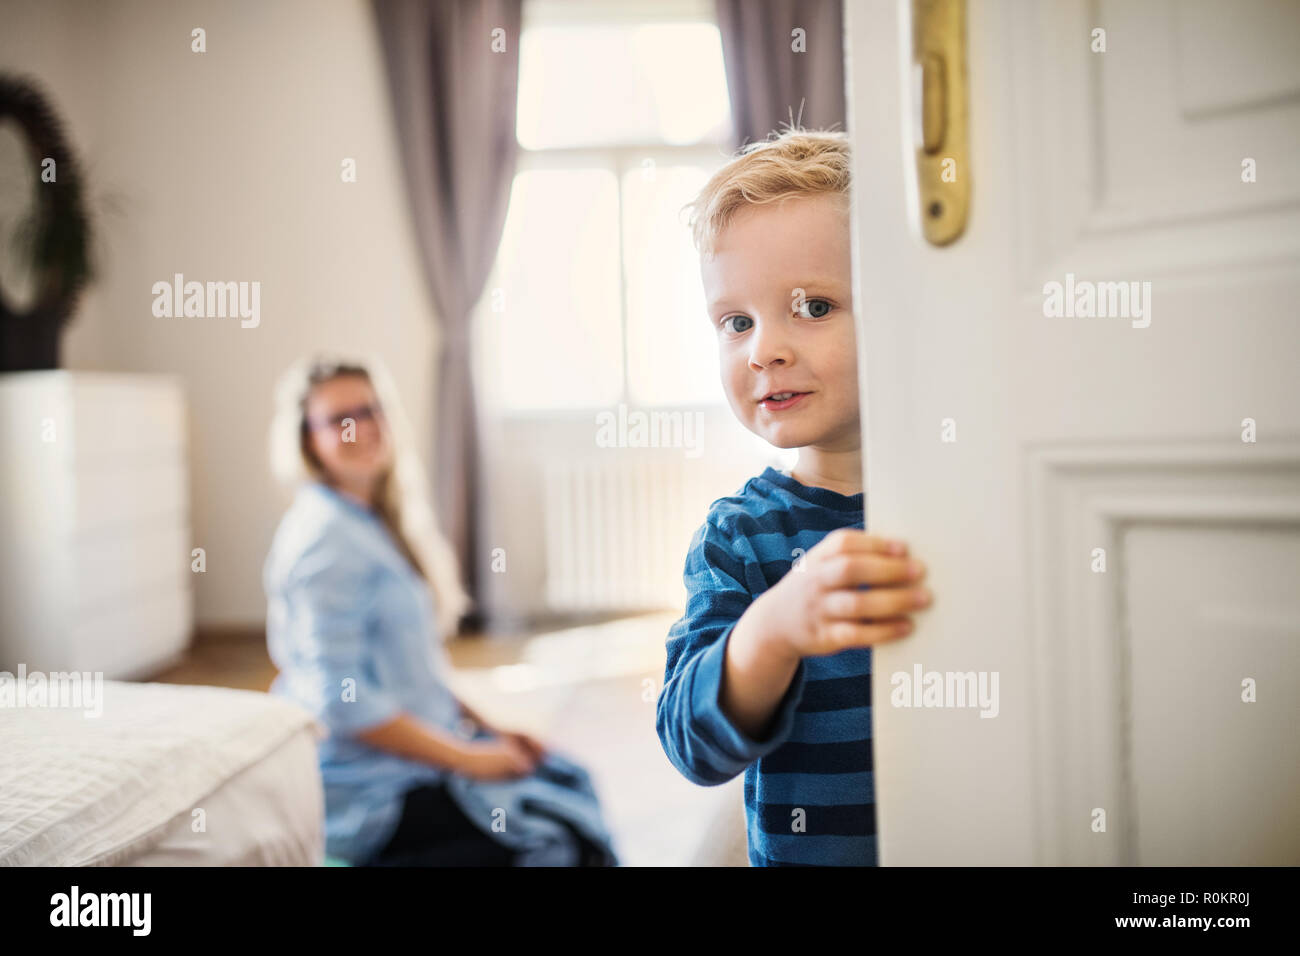 A toddler boy with young mother in the background inside in a bedroom. Stock Photo